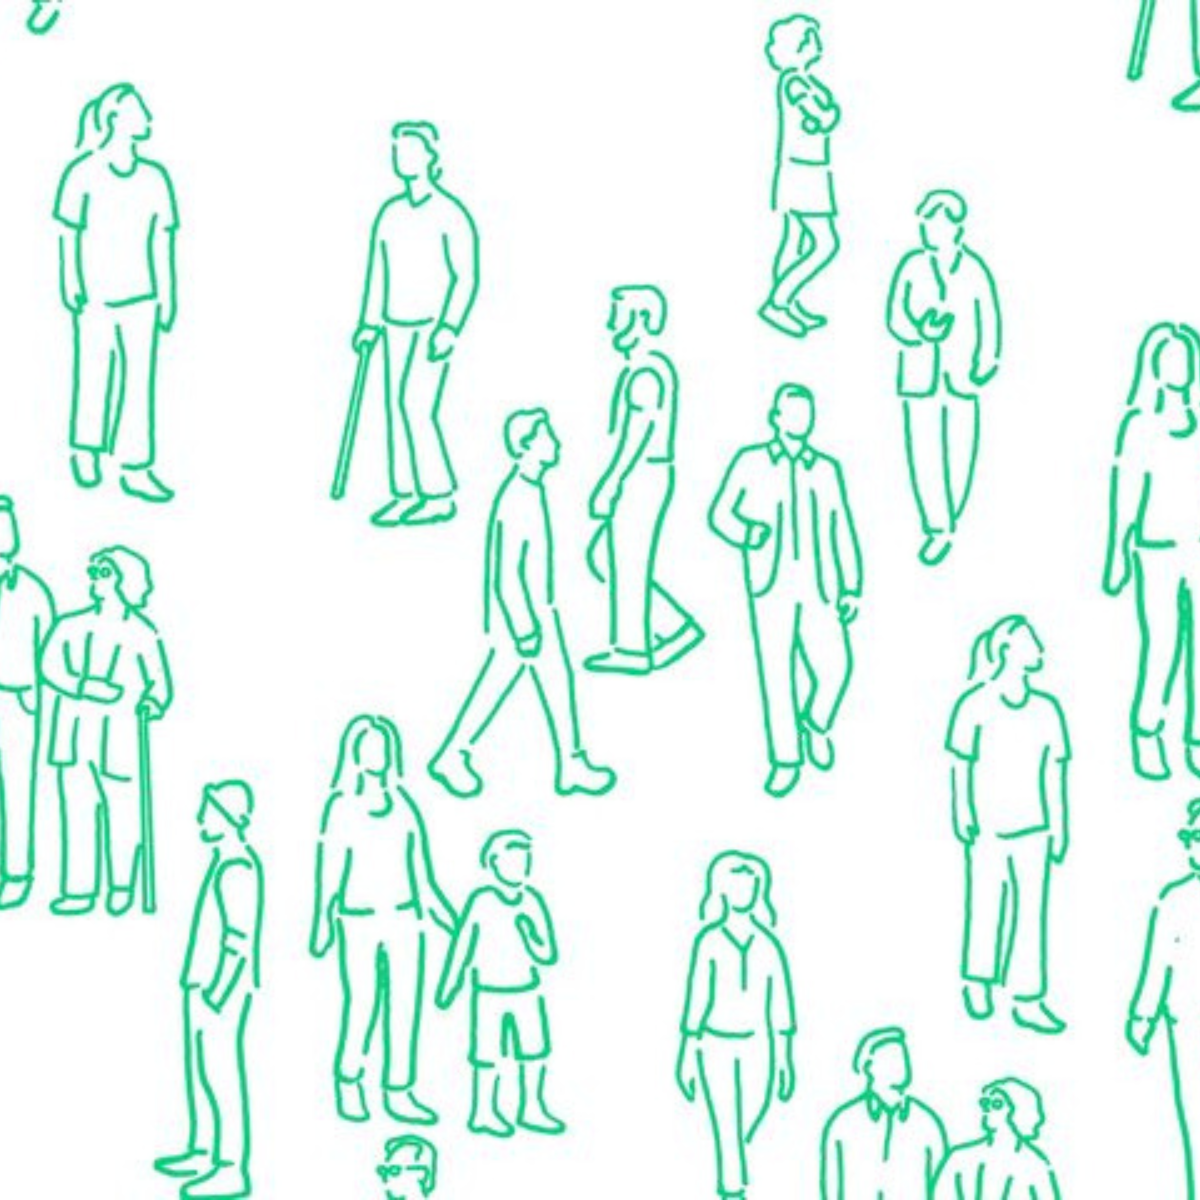 A crowd of people drawn with green outlines